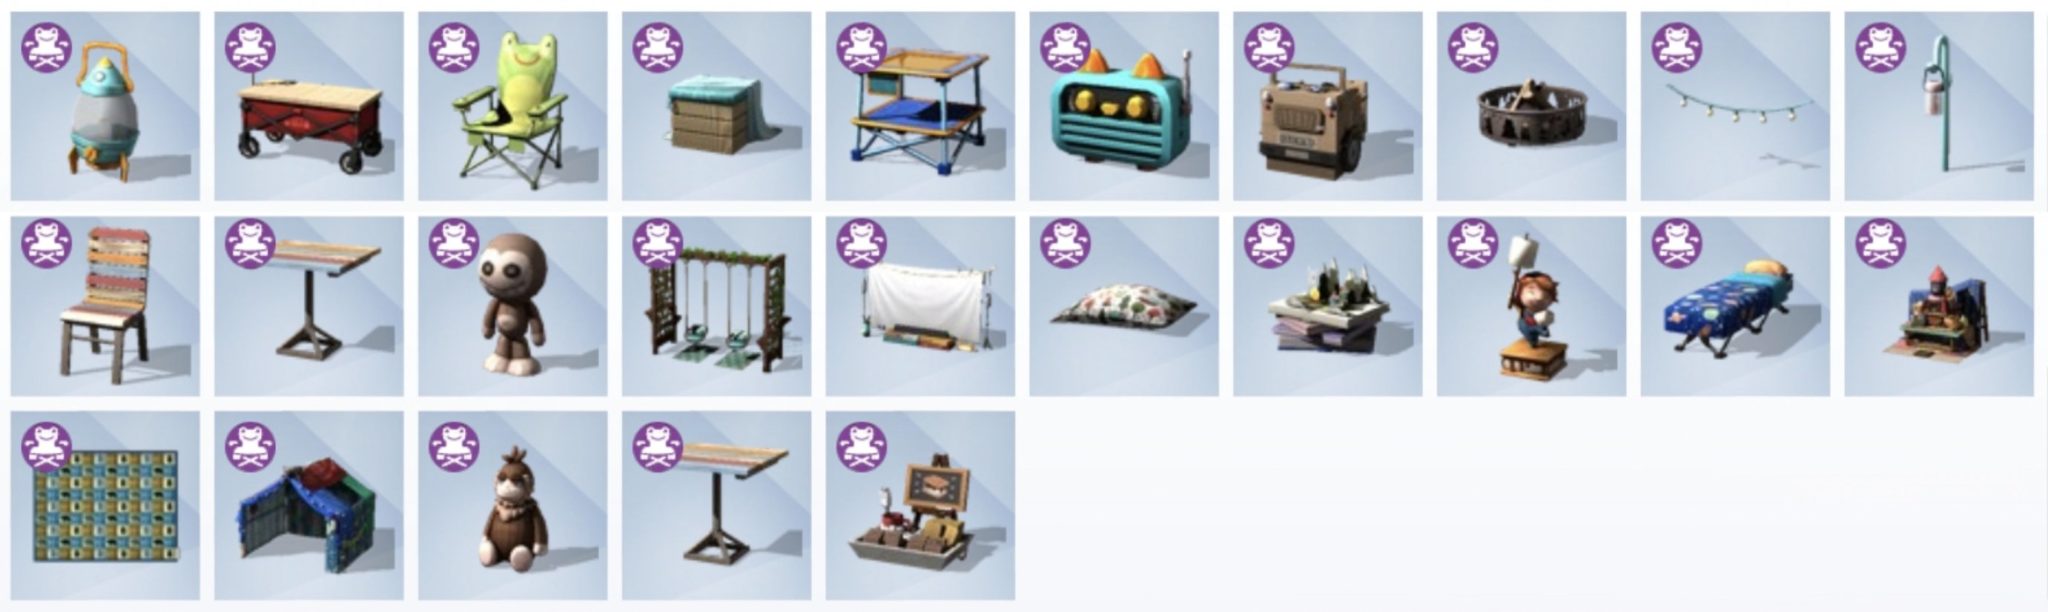 The Sims 4 Little Campers Kit Pack - Build / Buy Mode Objects